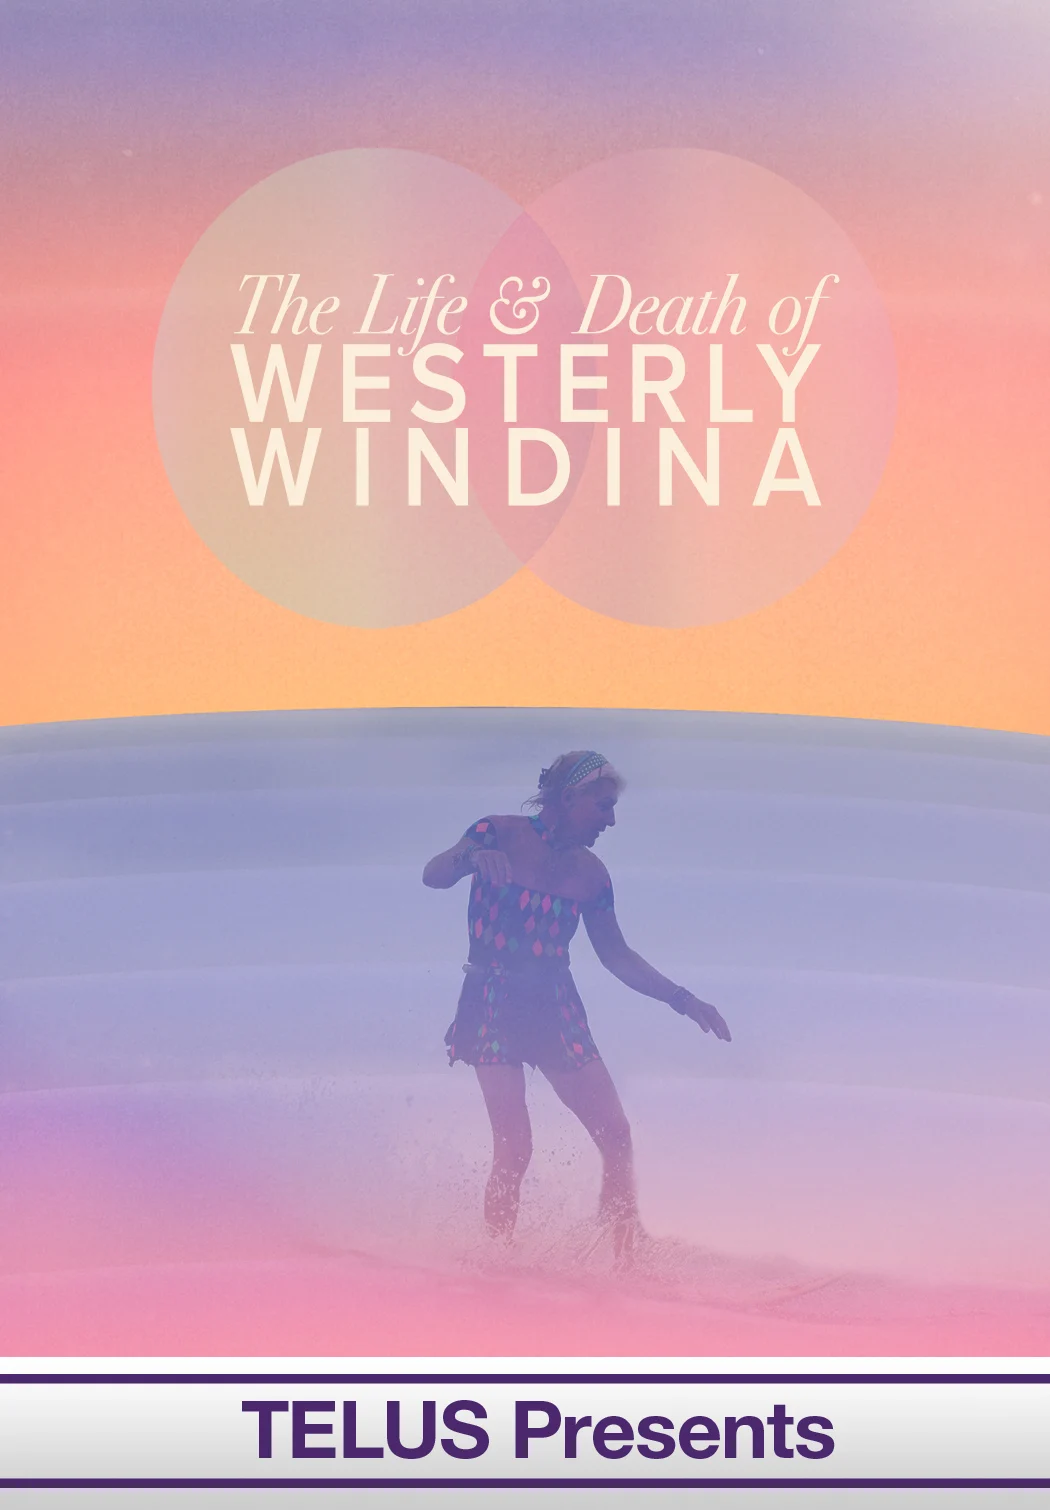 The Life & Death of Westerly Windina